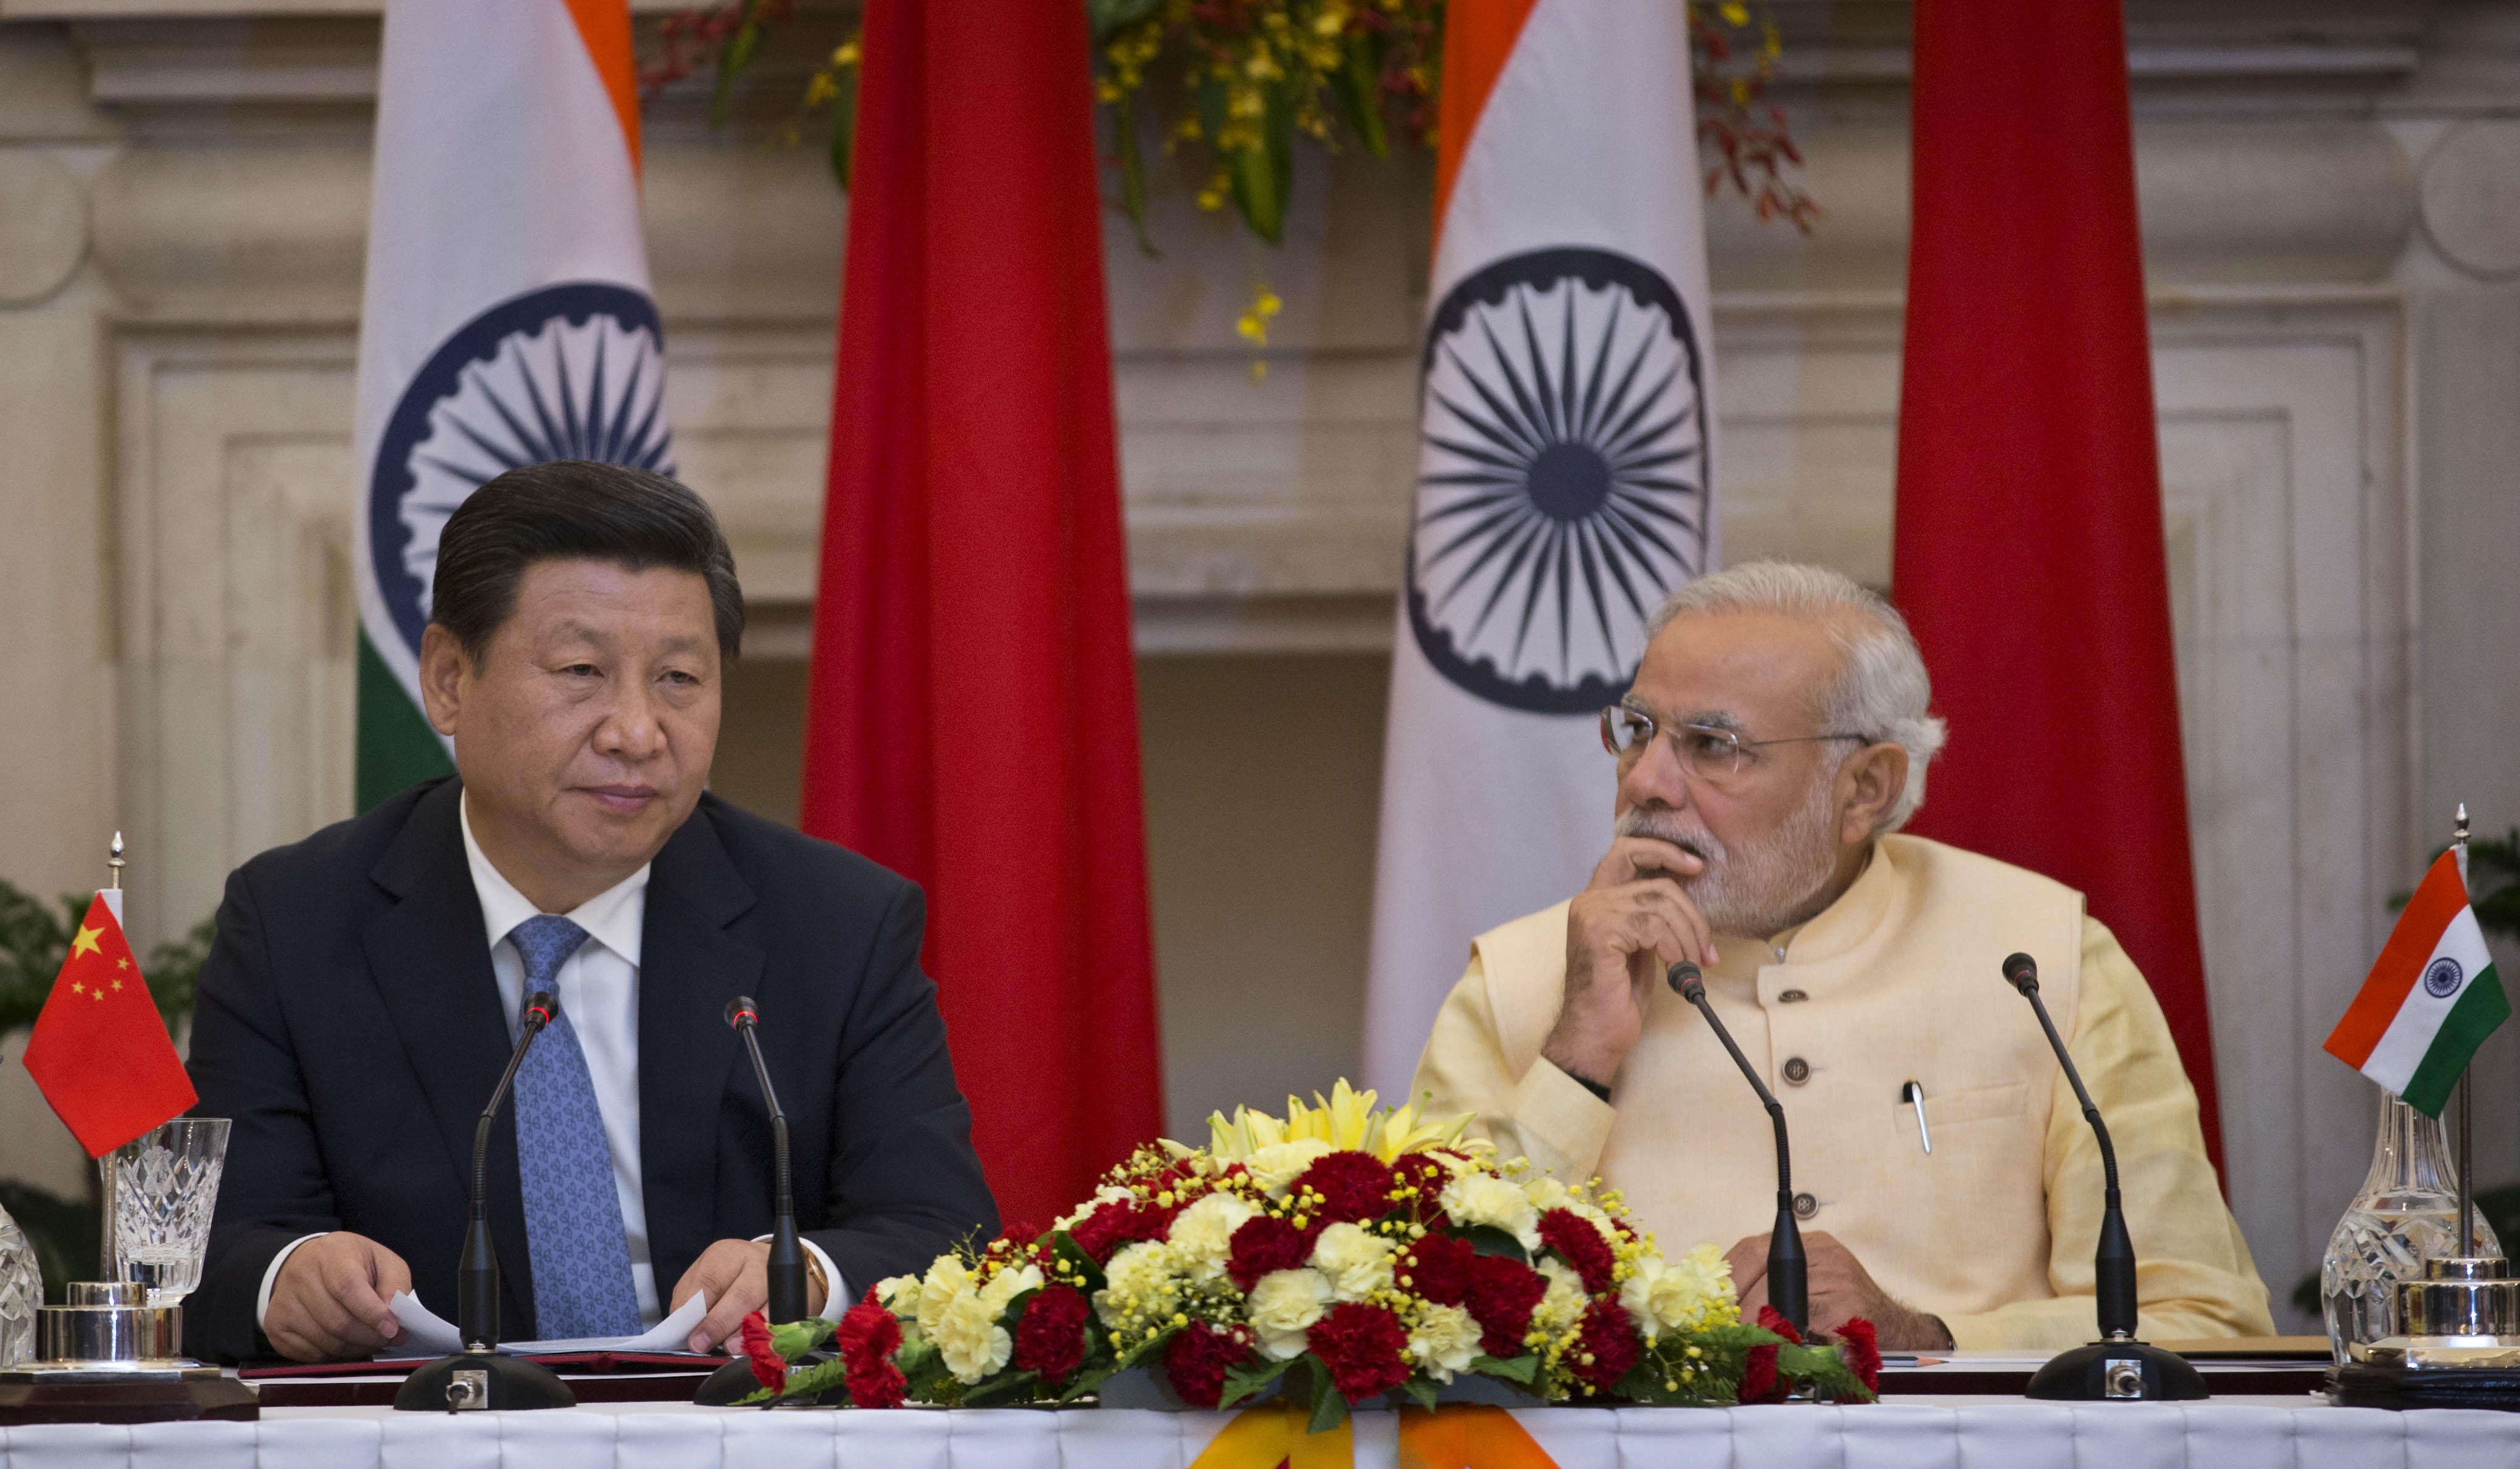 Chinese President Xi Jinping (L) makes a statement before the media as Indian Prime Minister Narendra Modi (R) watches after signing agreements in New Delhi, India on Sept. 18, 2014.